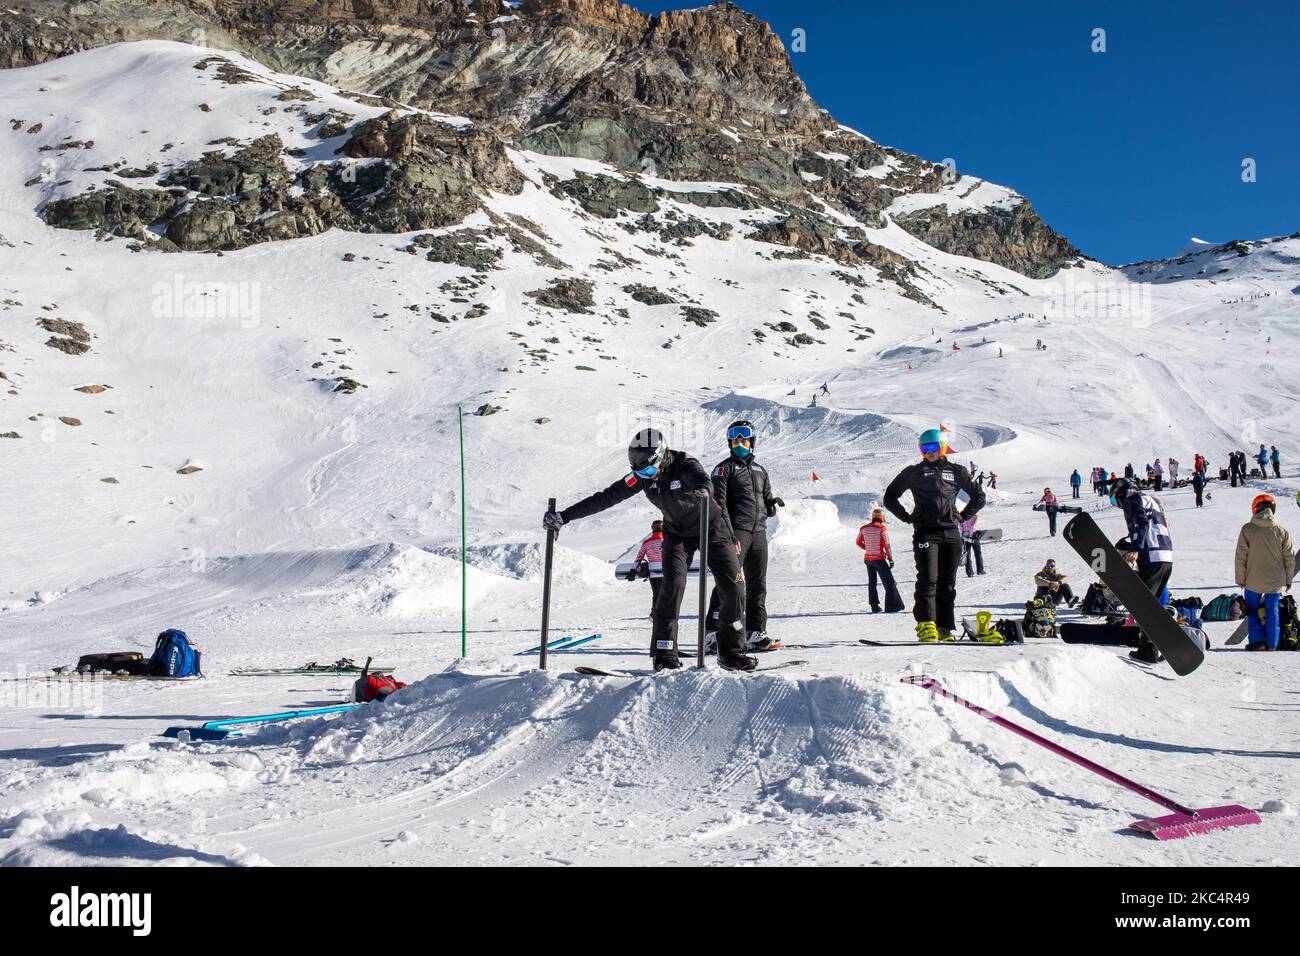 27/11/2020 Cervinia, Italy: The Italian Paralympic team of snowboard during his training in a competitive season full of uncertainties due to the spread of Covid-19 pandemic. Cervinia alpine ski resort is the only winter resort open to ski training in the northwest of Italy. The Plan Maison (m. 2.500 MSL. ) slopes are reserve only for the professional teams, but now with the decision to keep the slopes closed for tourists during the Christmas holidays, the property of the ski resort has announced that it does not know how long it will be able to remain open with so little income. The lack of s Stock Photo